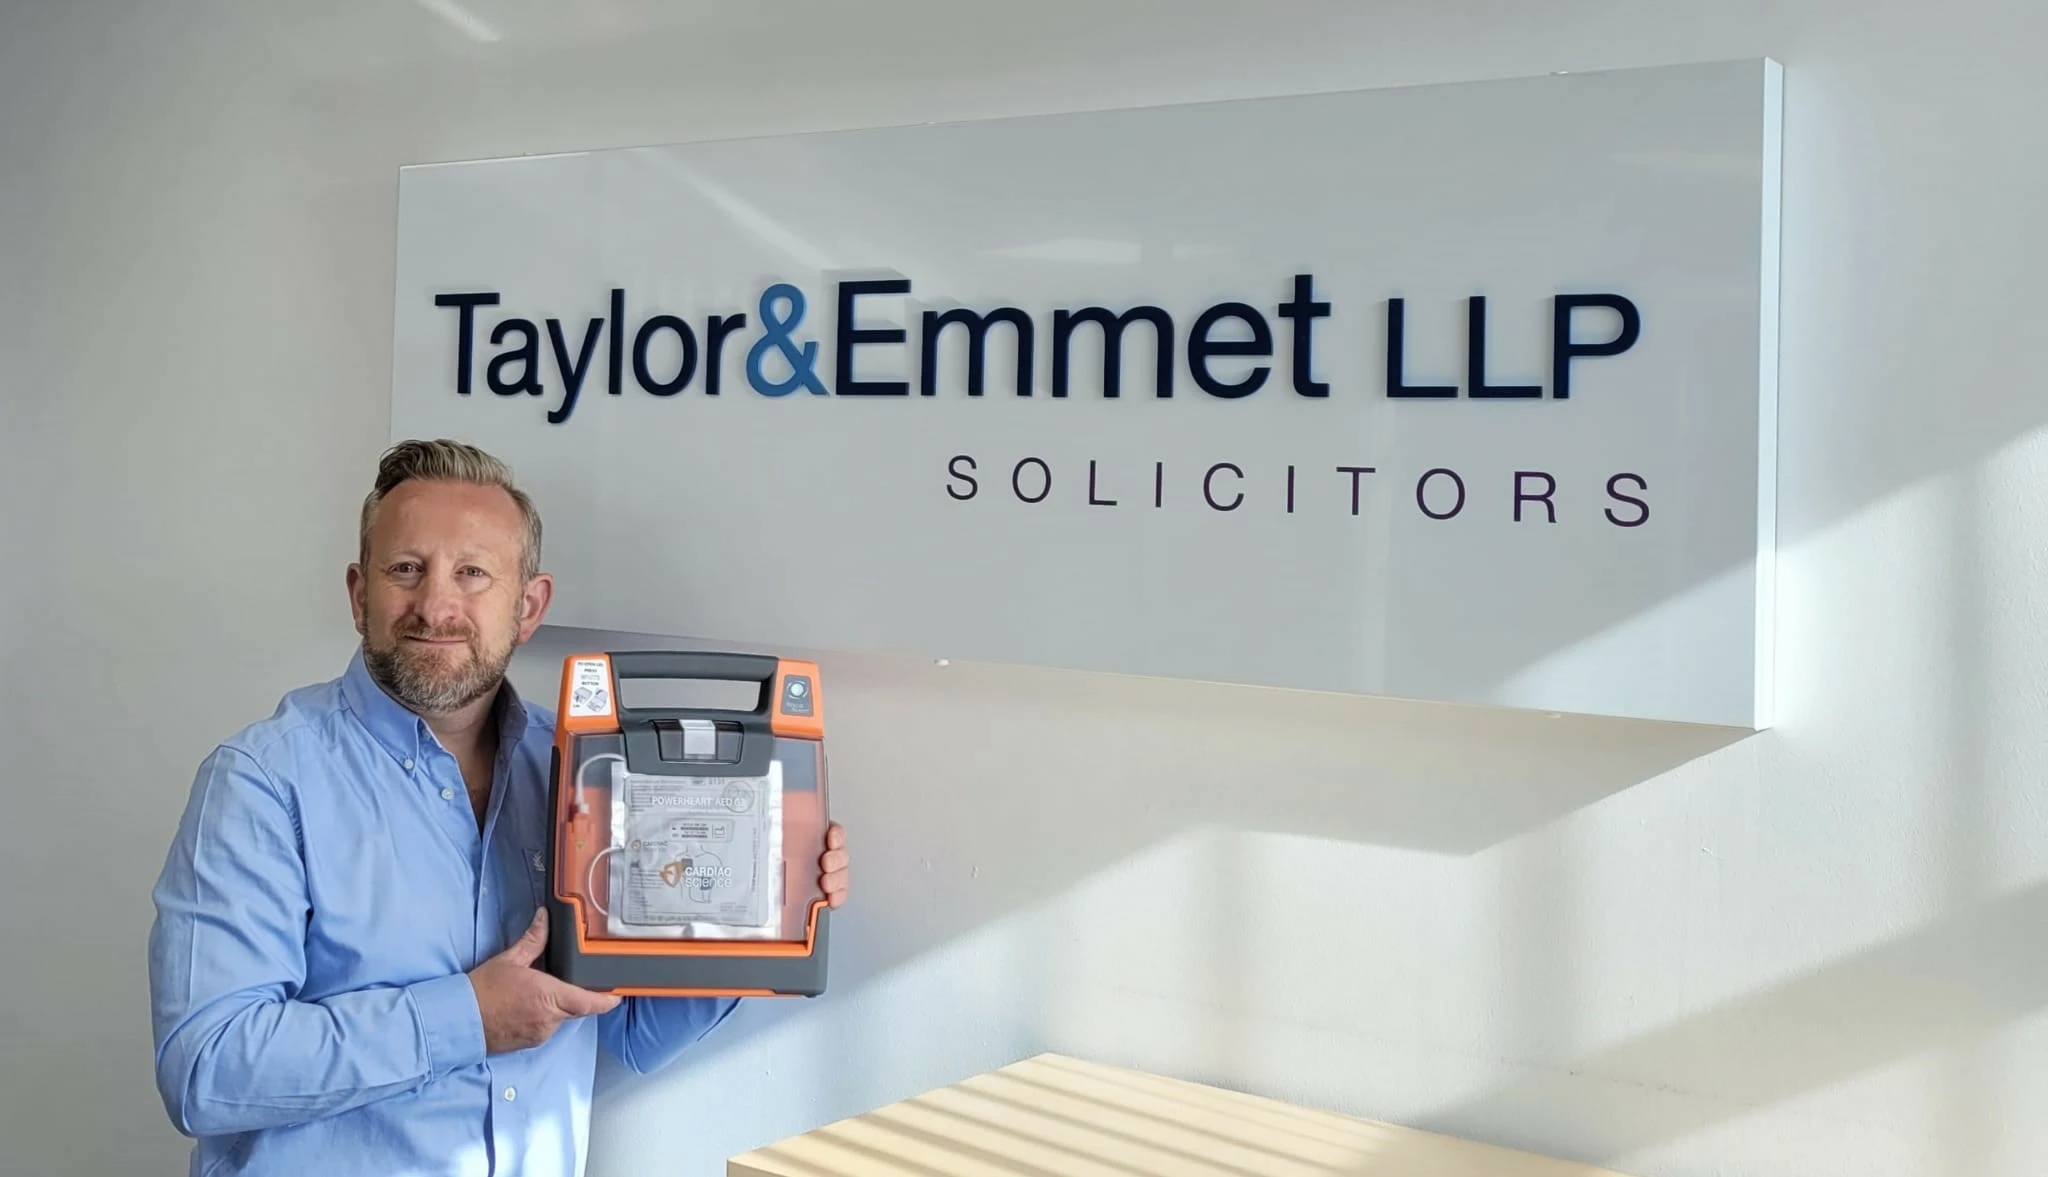 Taylor&Emmet's facilities manager, Lee Stacey, with one of the defibrillators purchased by the firm. 